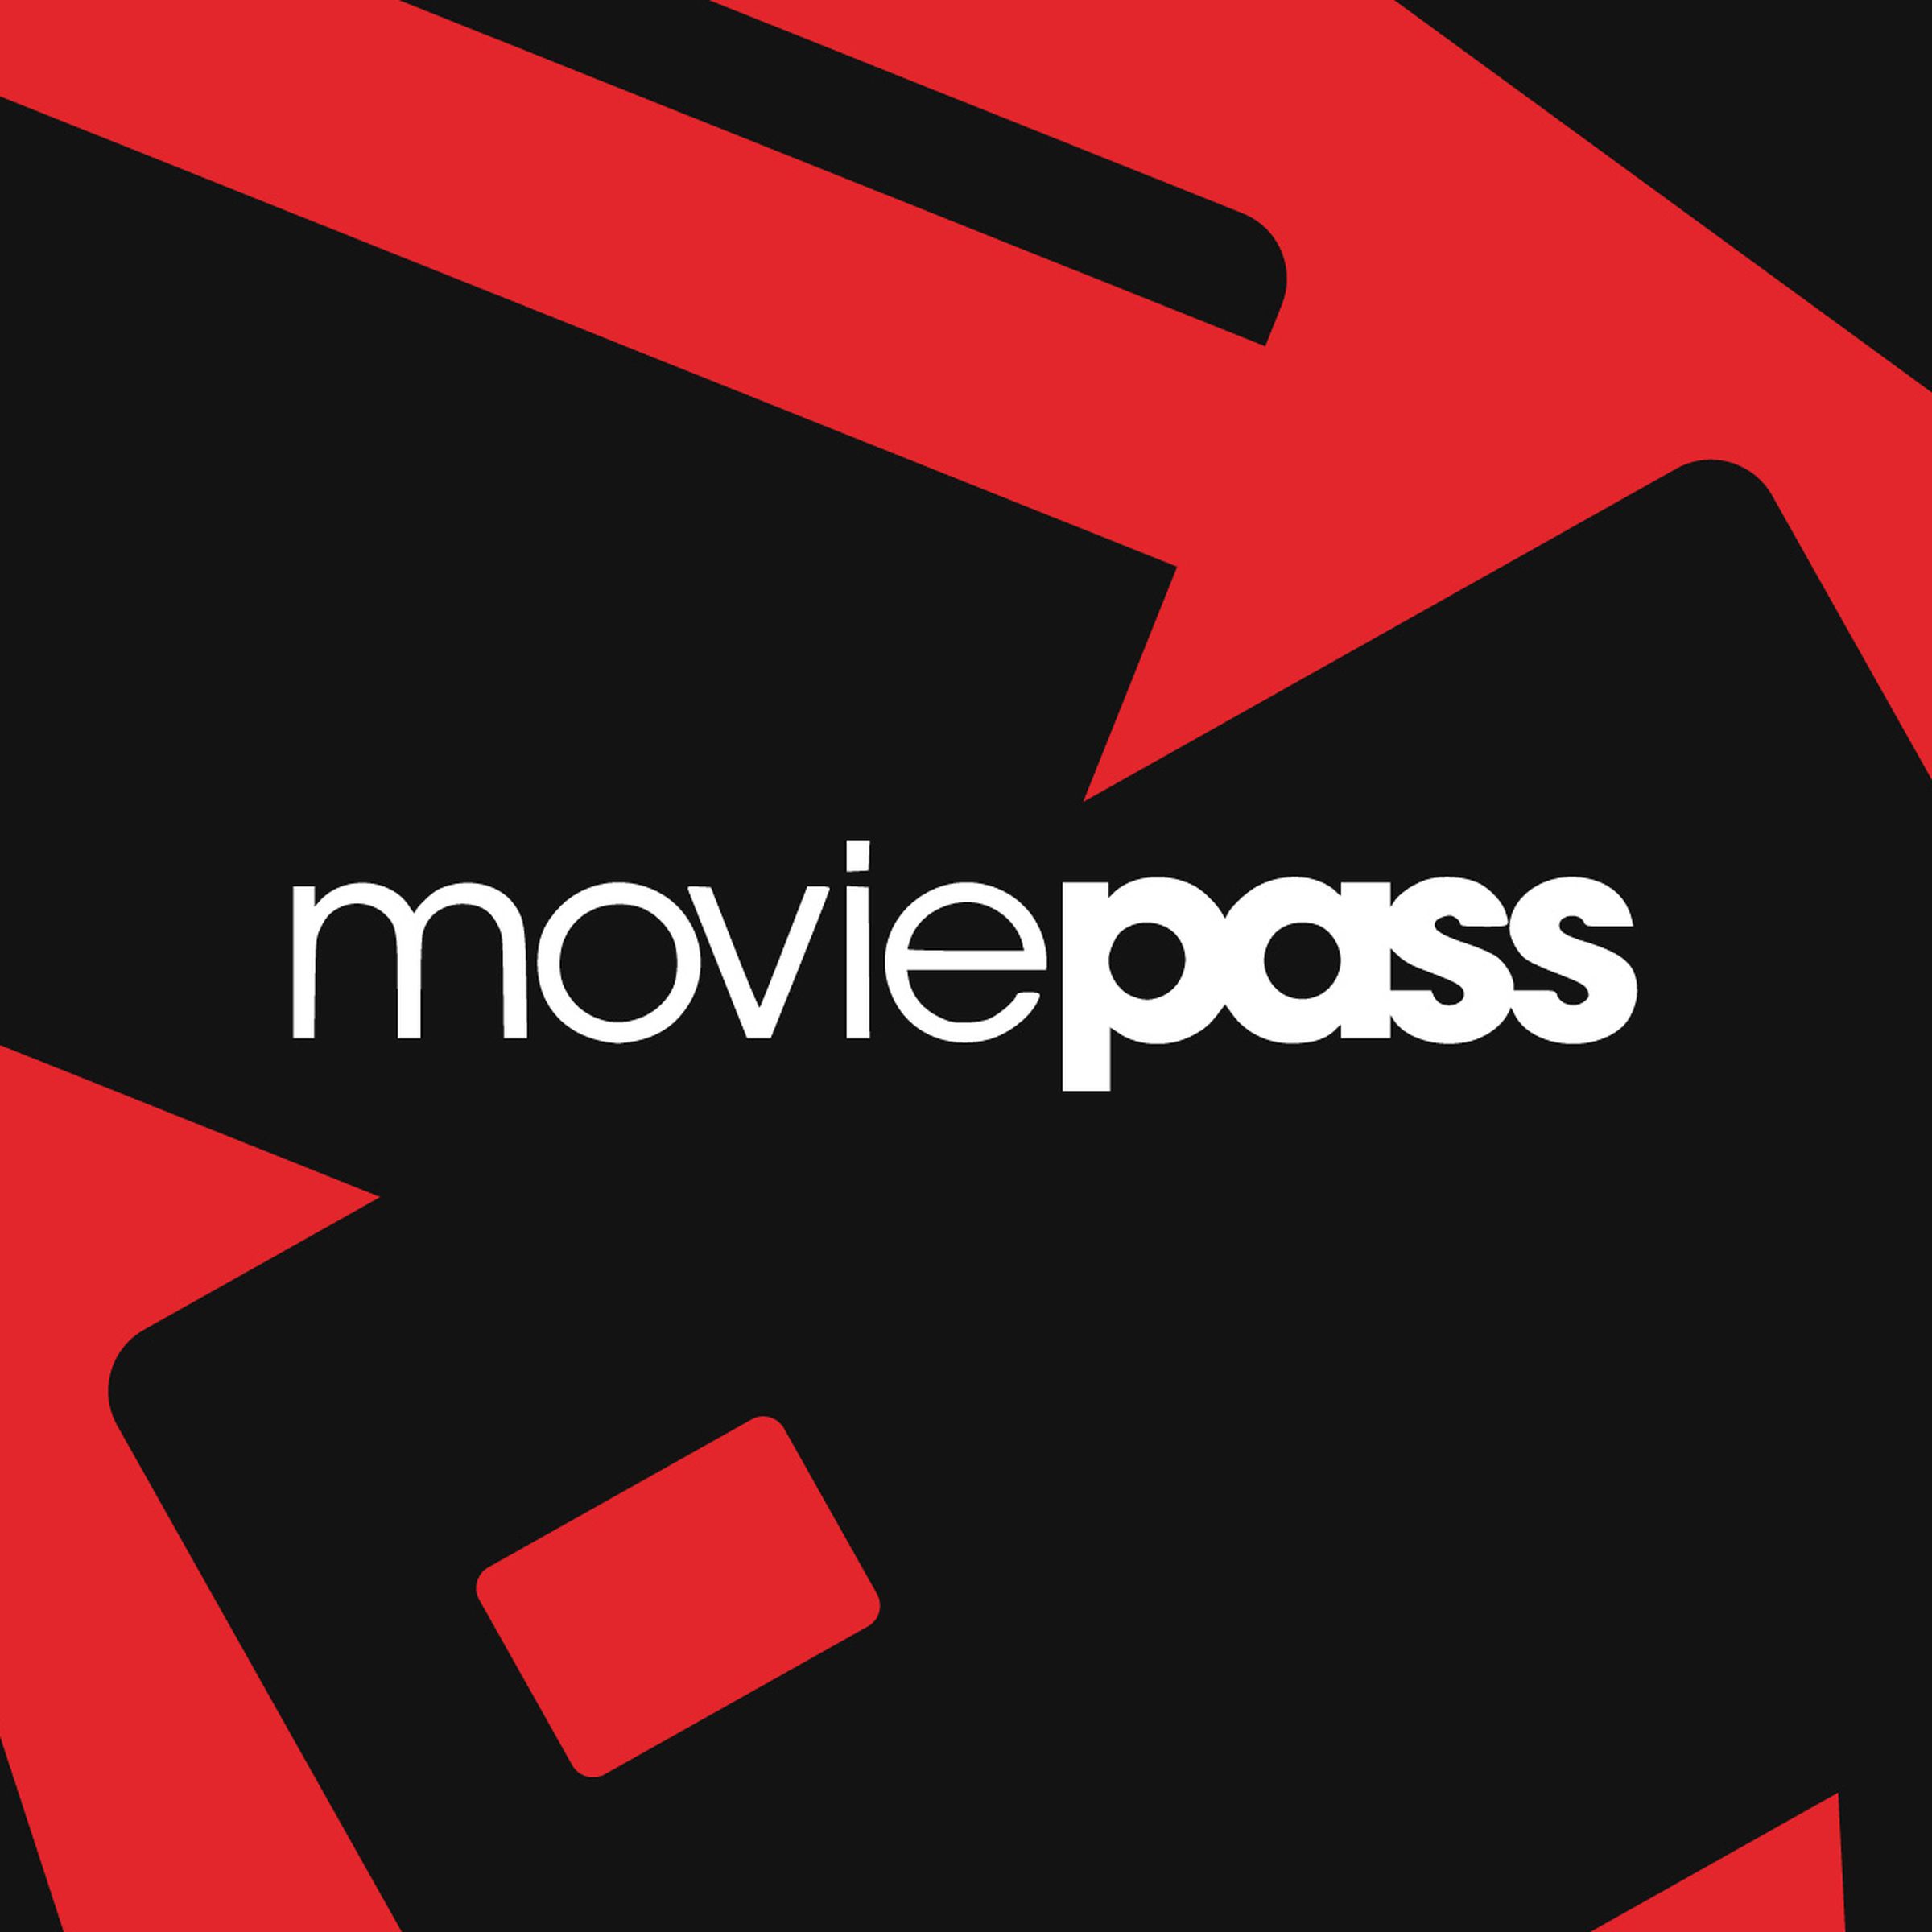 MoviePass logo over a black and red background